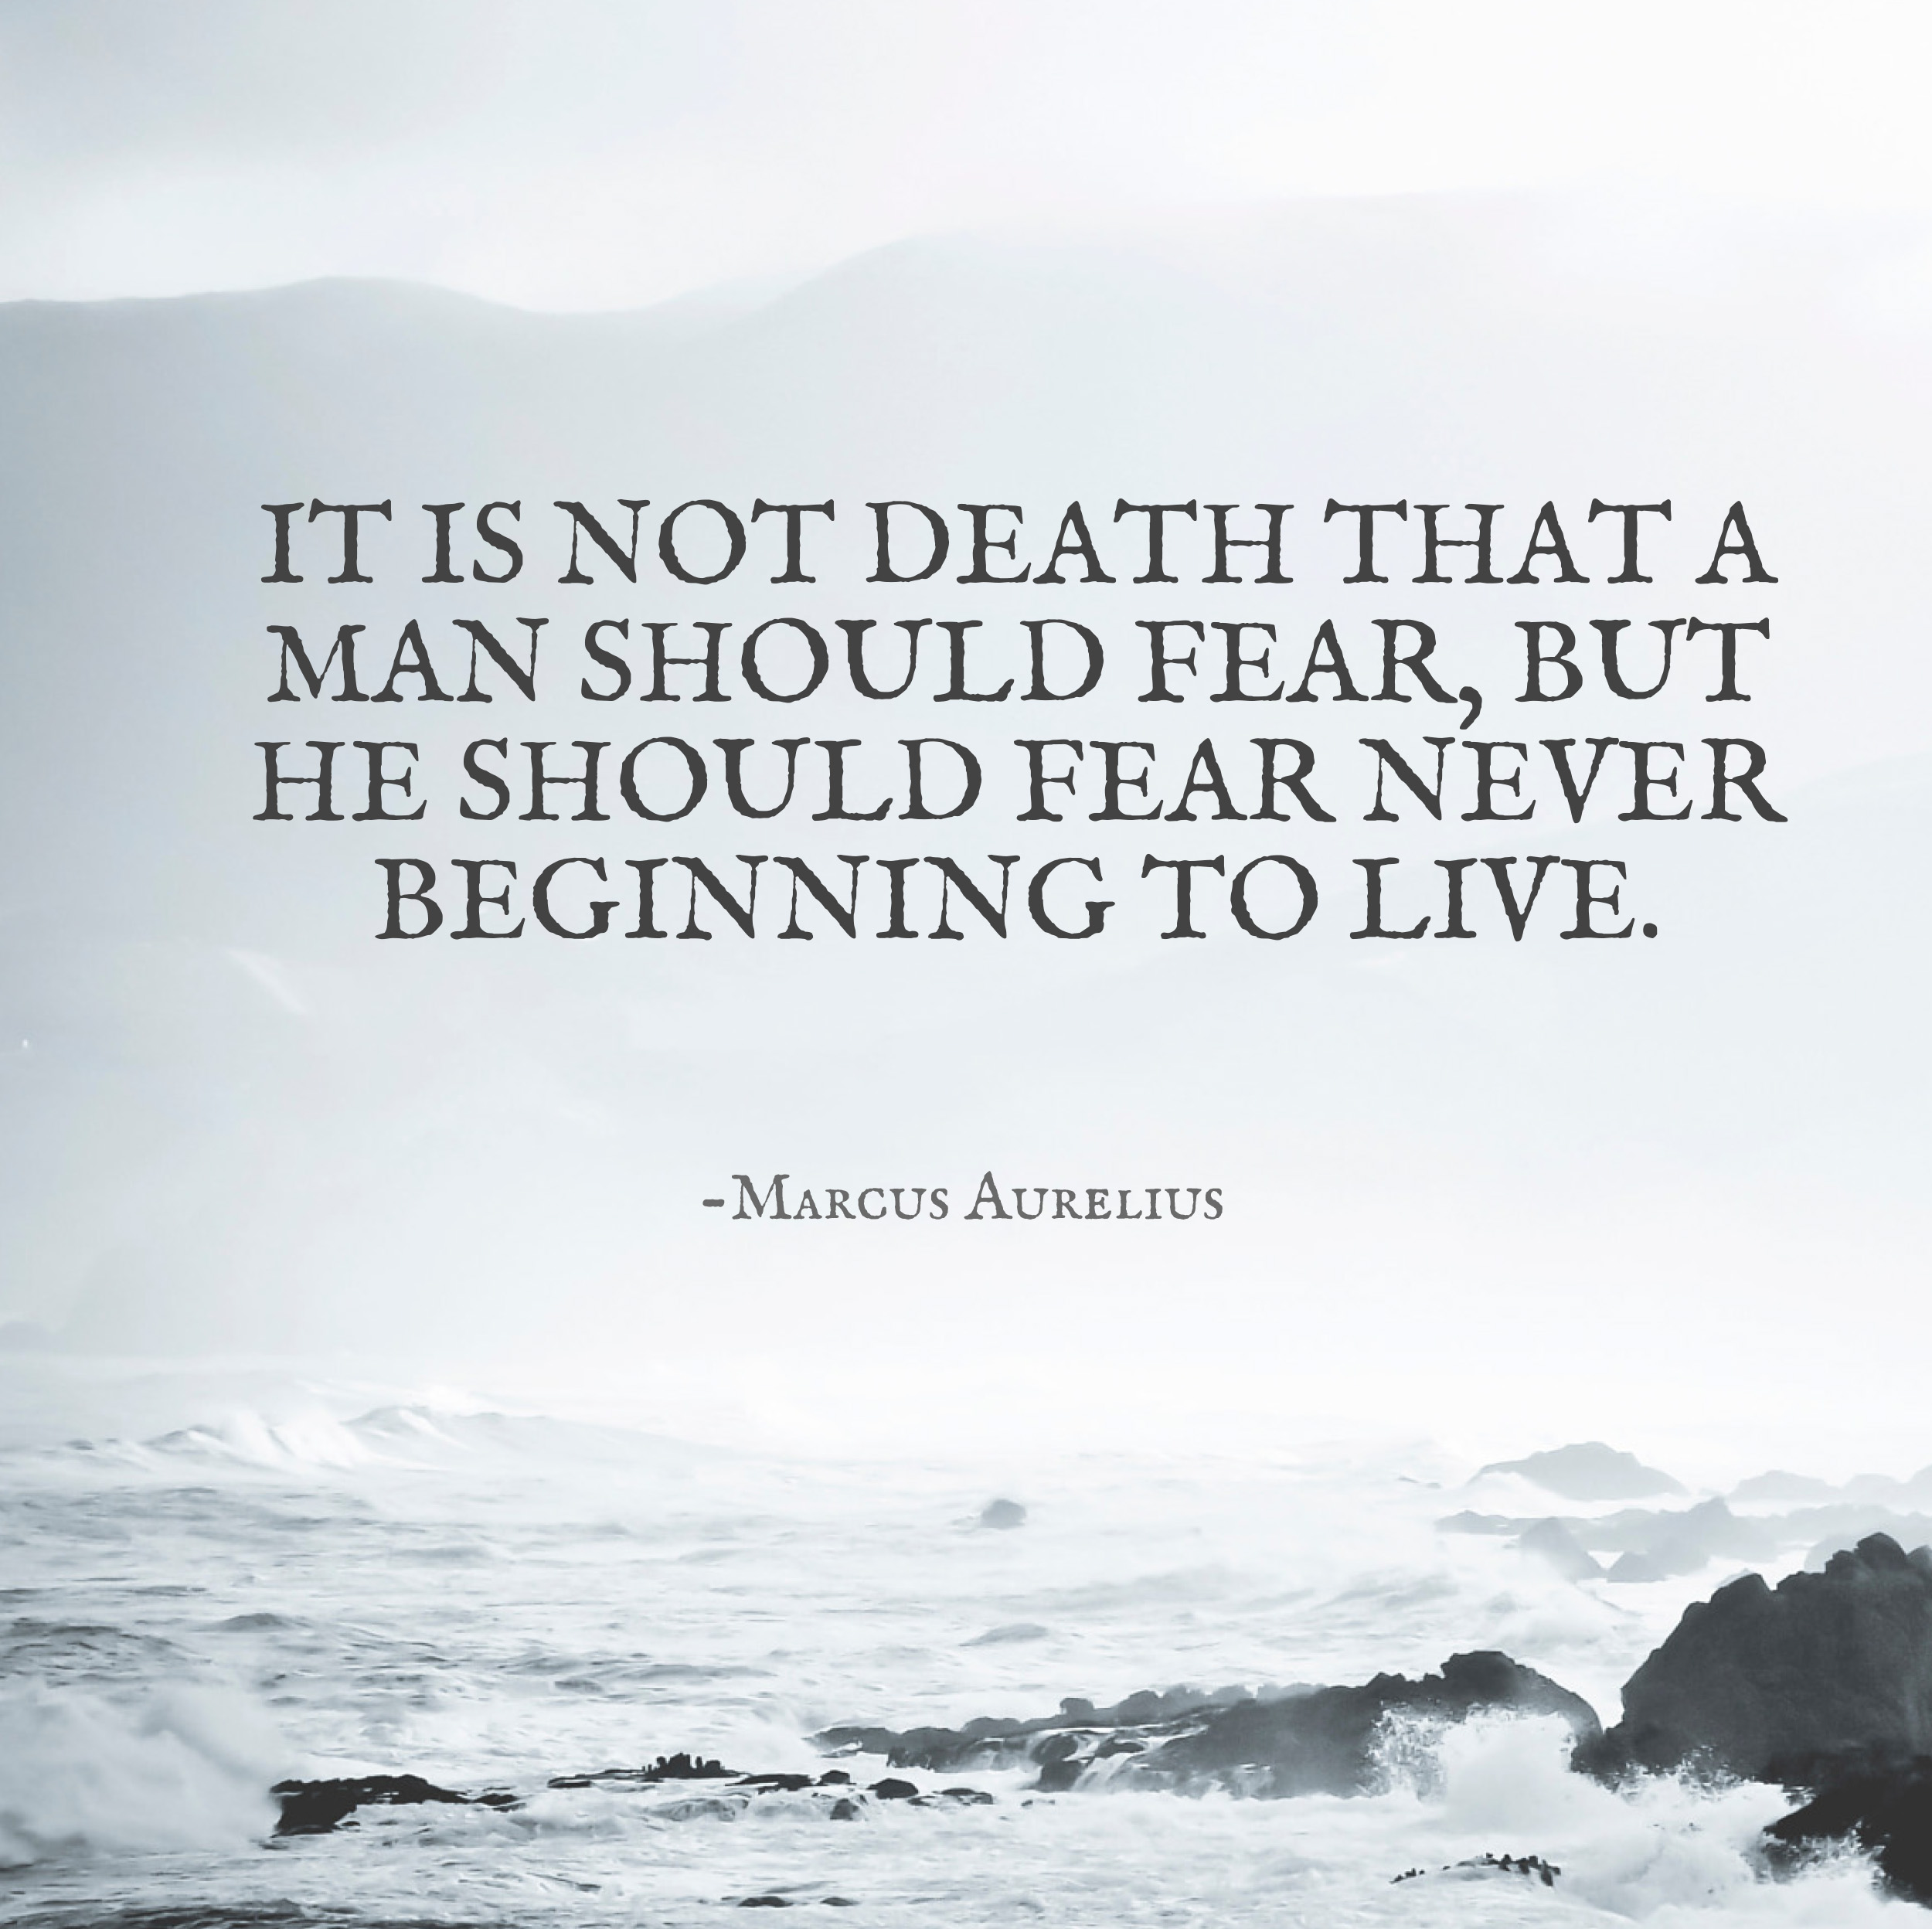 It is not death that a man should fear, but he should fear never